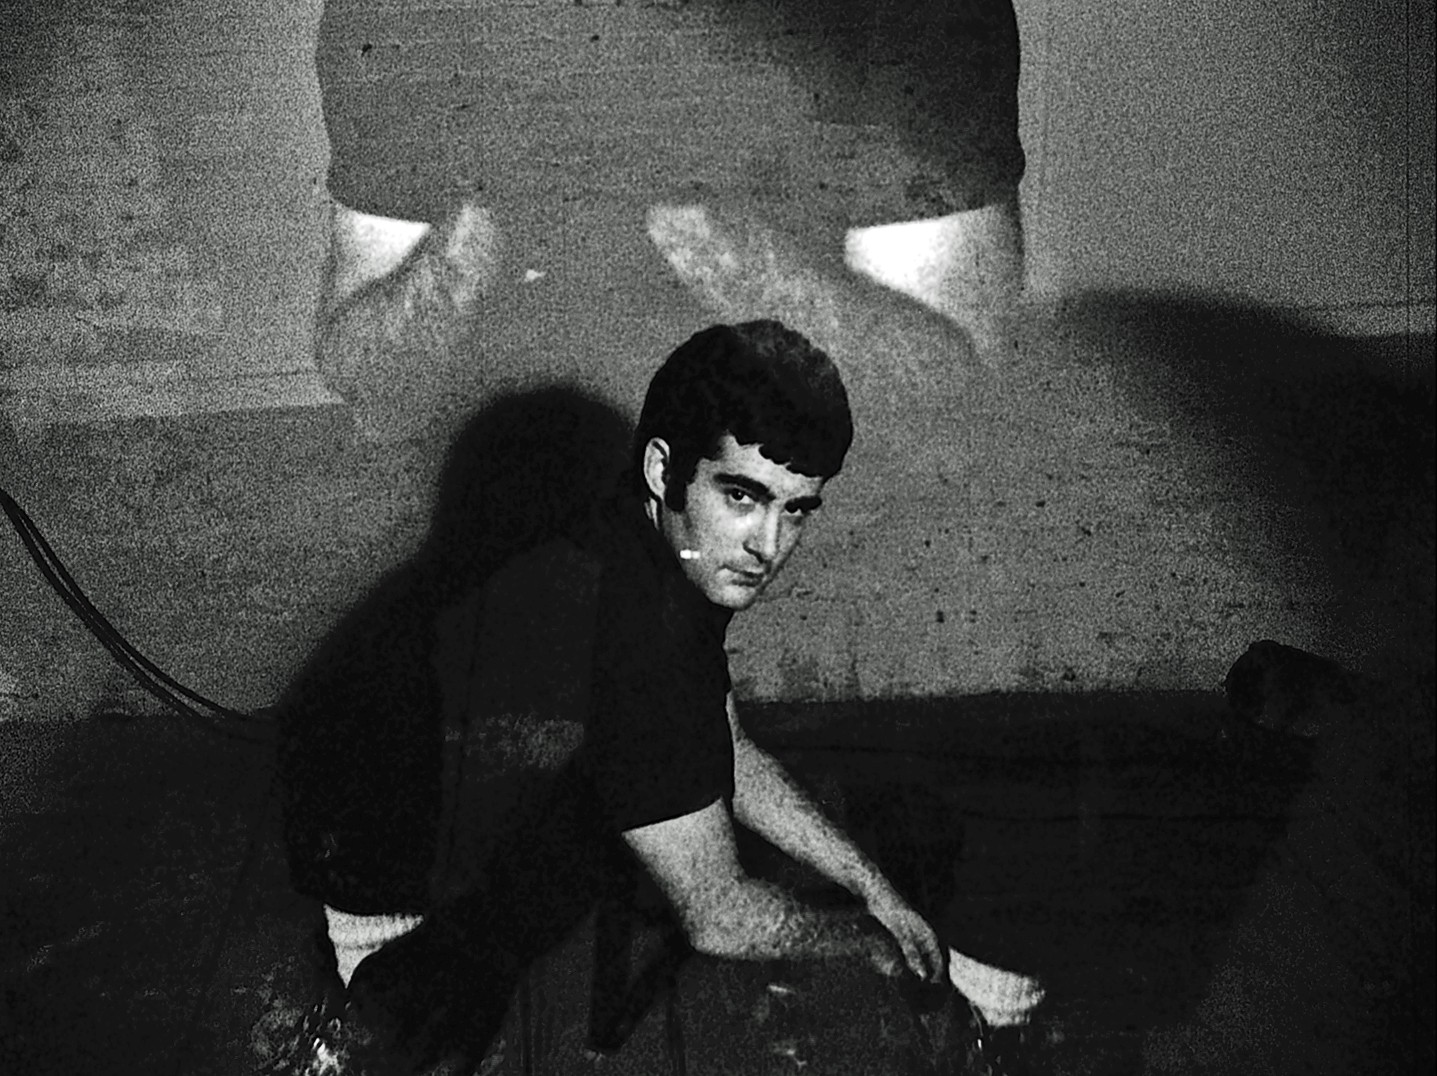 Larry Poons in Manual of Arms, 1966, Hollis Frampton (courtesy of the Criterion Collection)